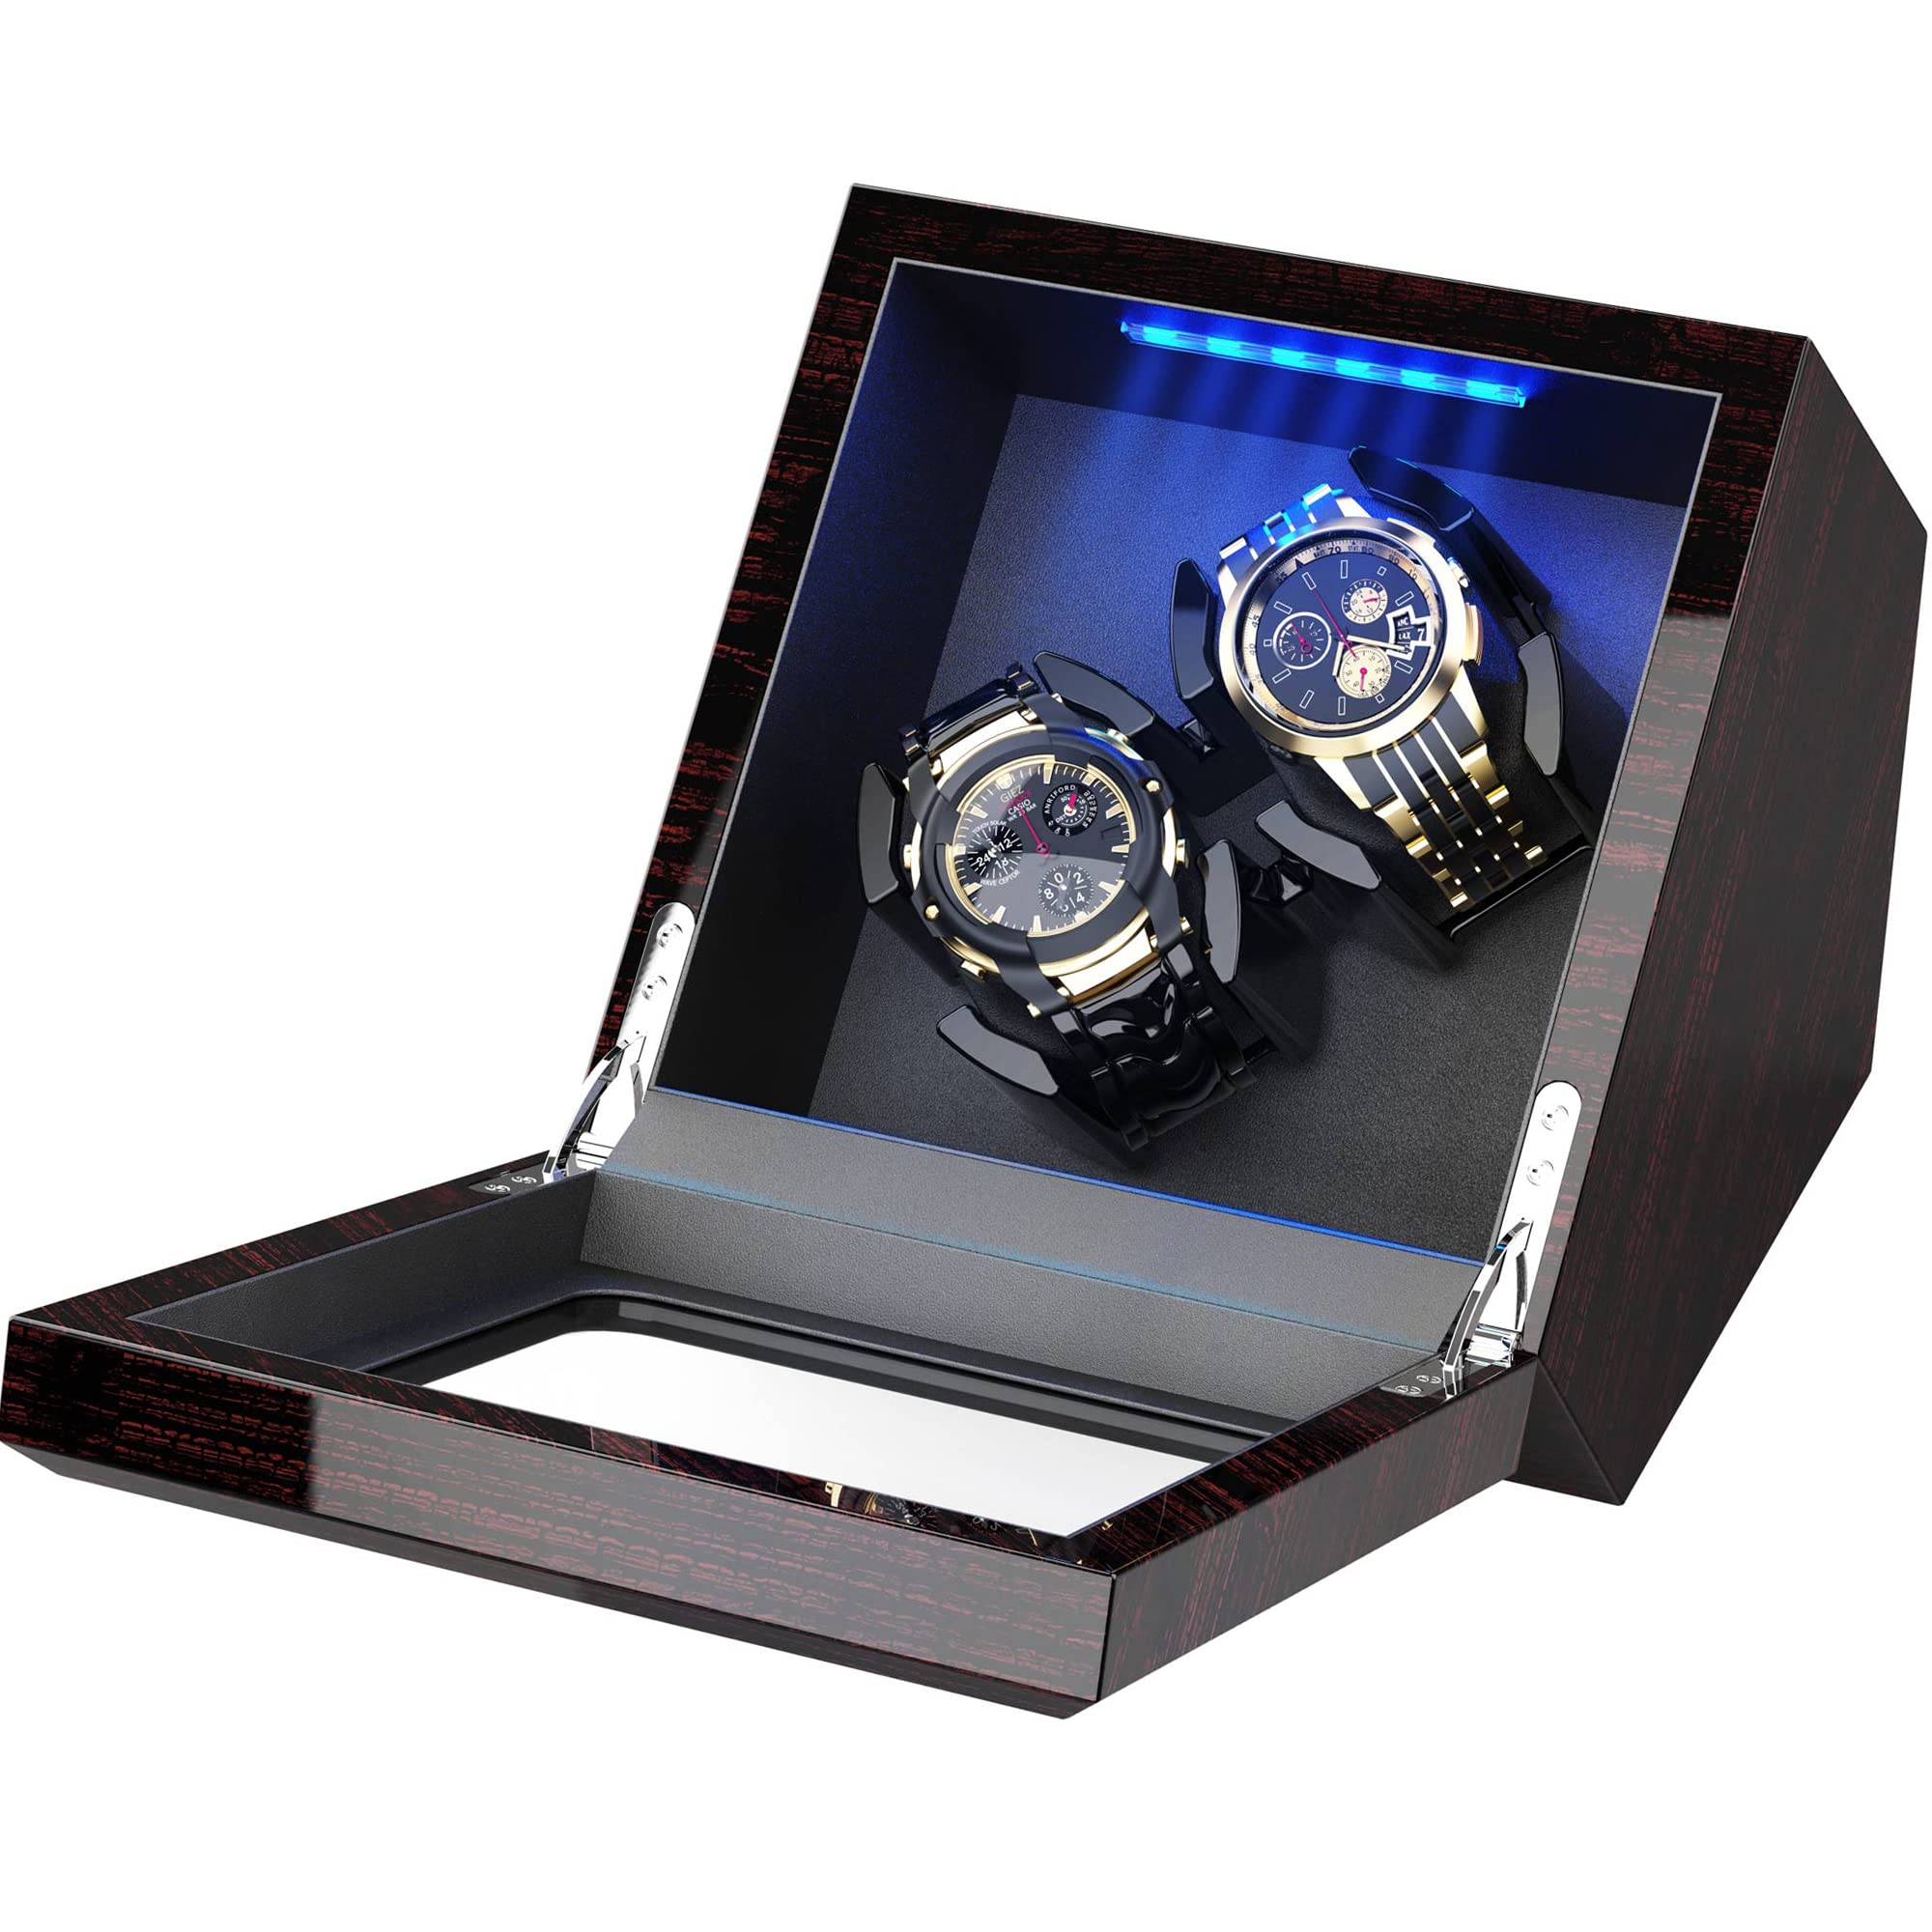 INCLAKE High End Double Watch Winder for Rolex with Super Quiet Motor, Blue LED Light & Flexible Watch Pillows, Watch Winders for Automatic Watches with AC Adapter or Battery Powered